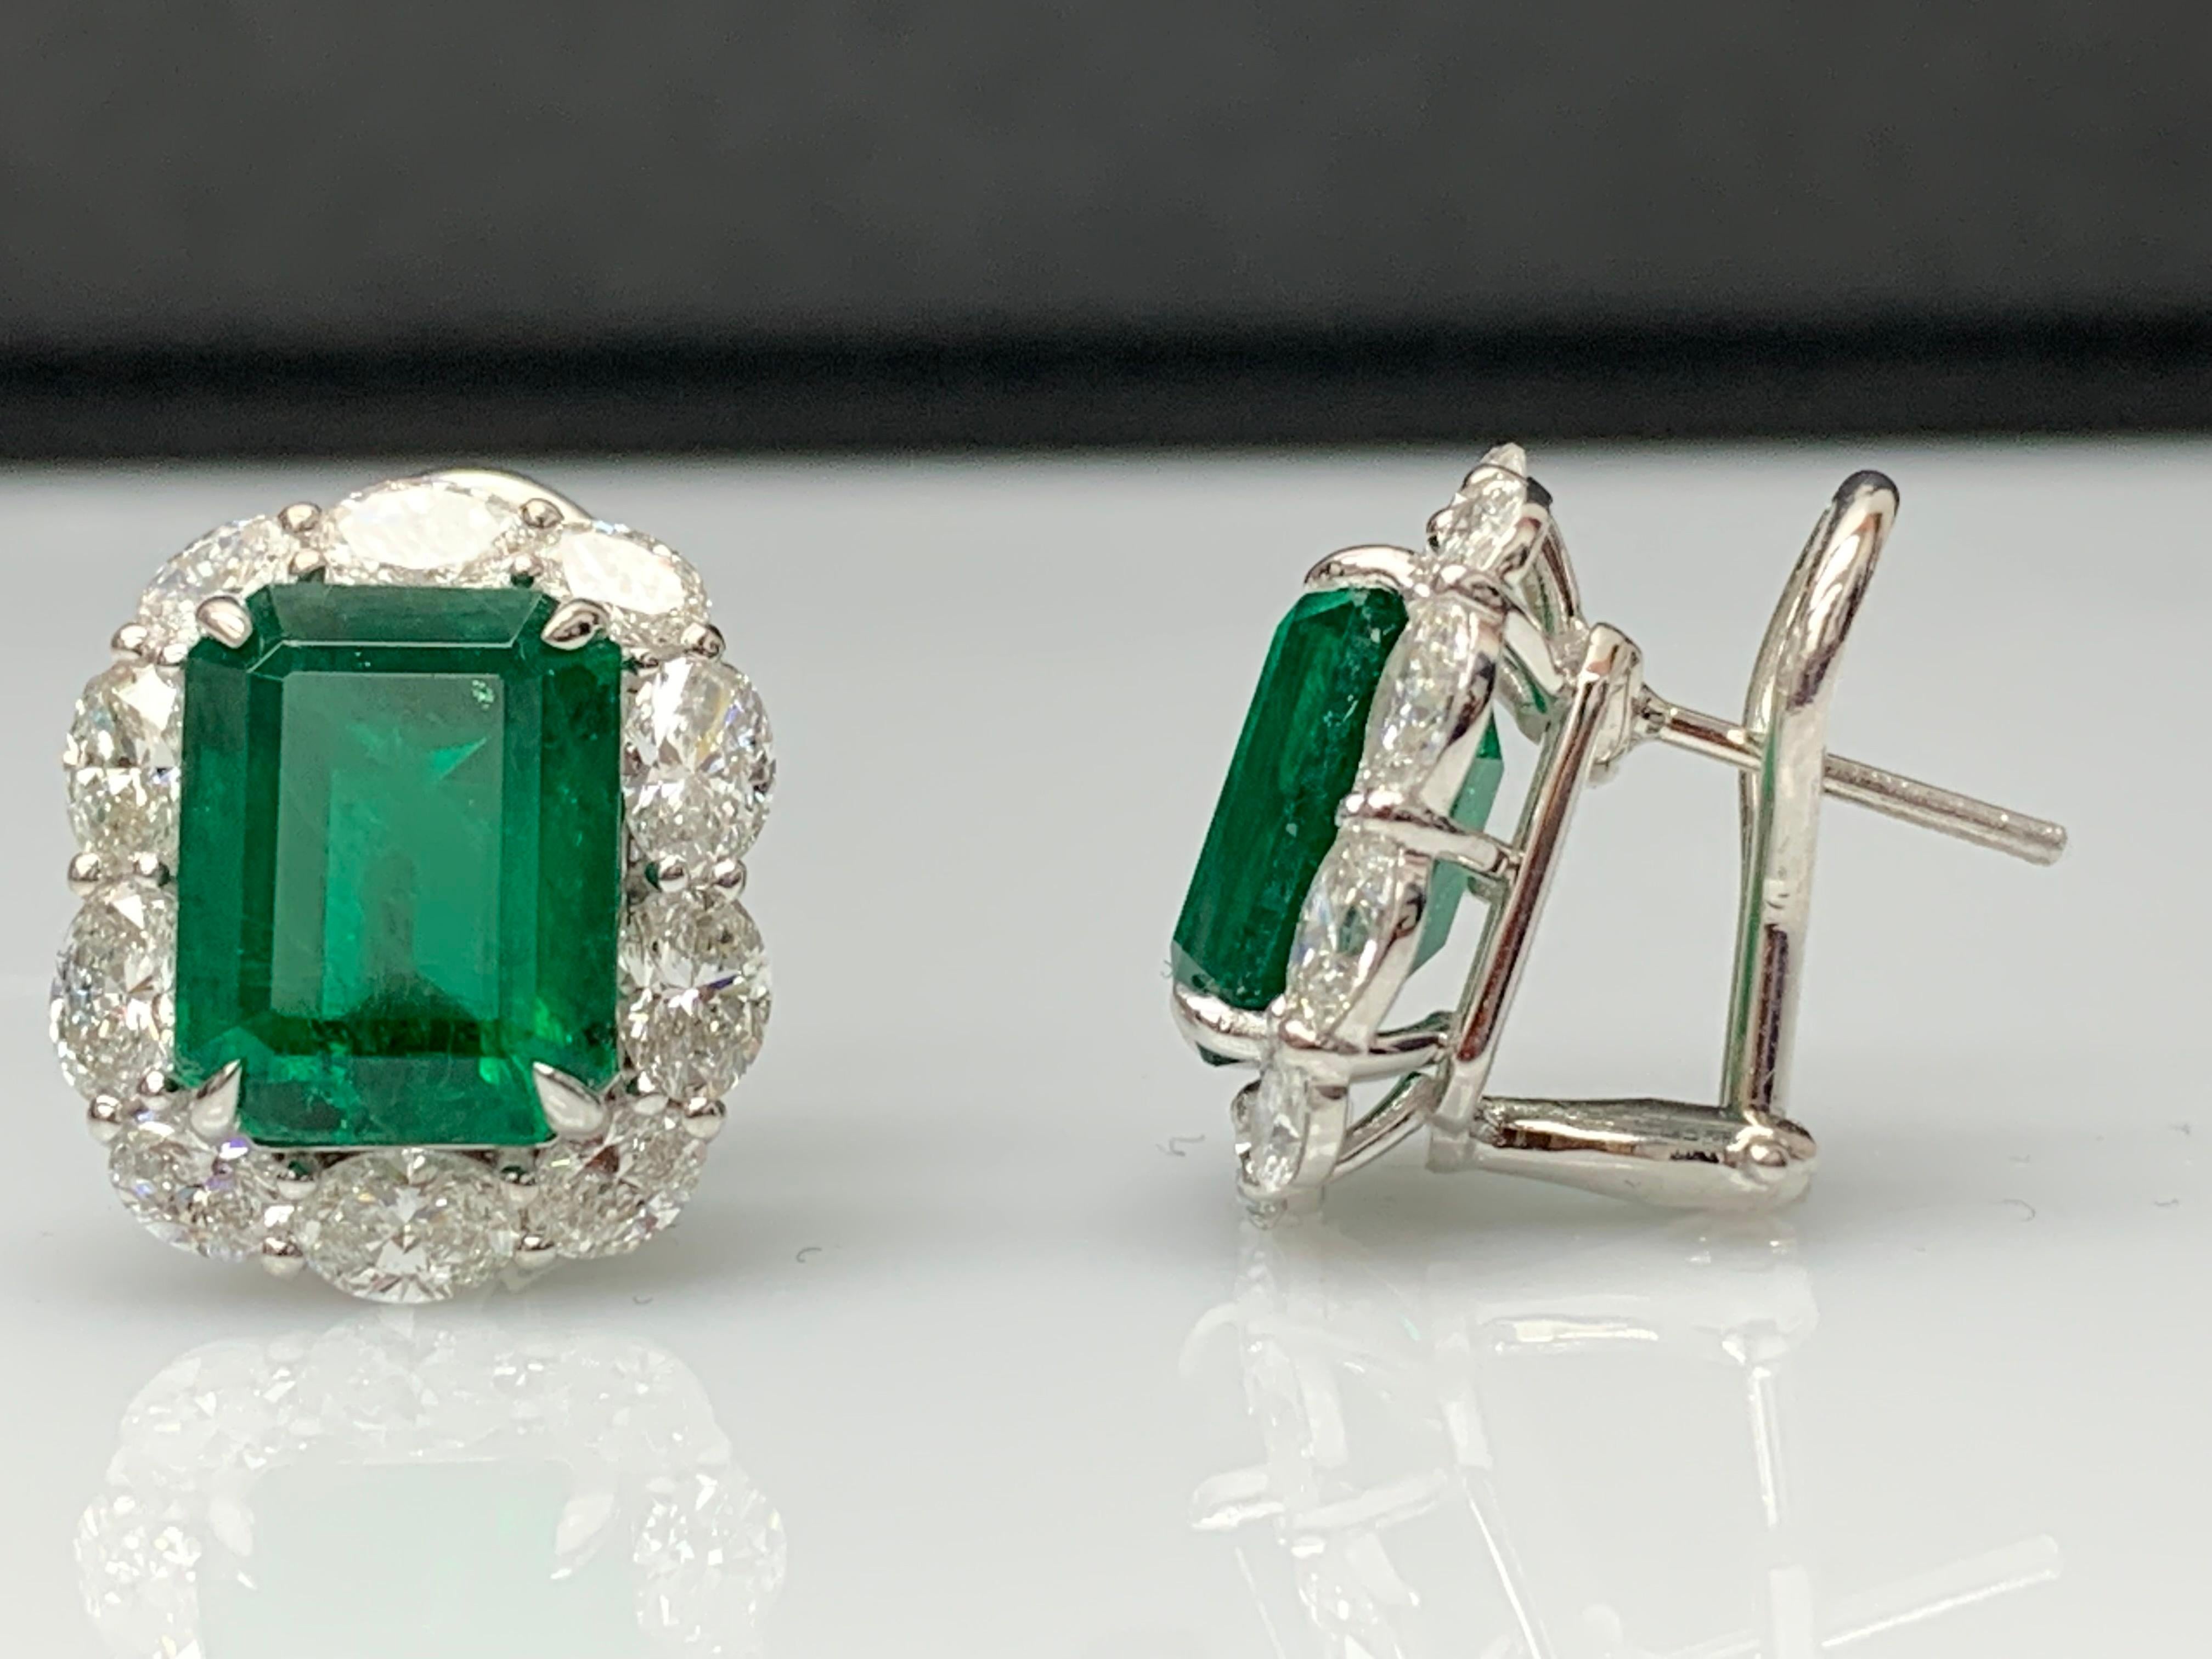 7.44 Carat Emerald Cut Emerald and Diamond Halo Earring in 18K White Gold For Sale 4